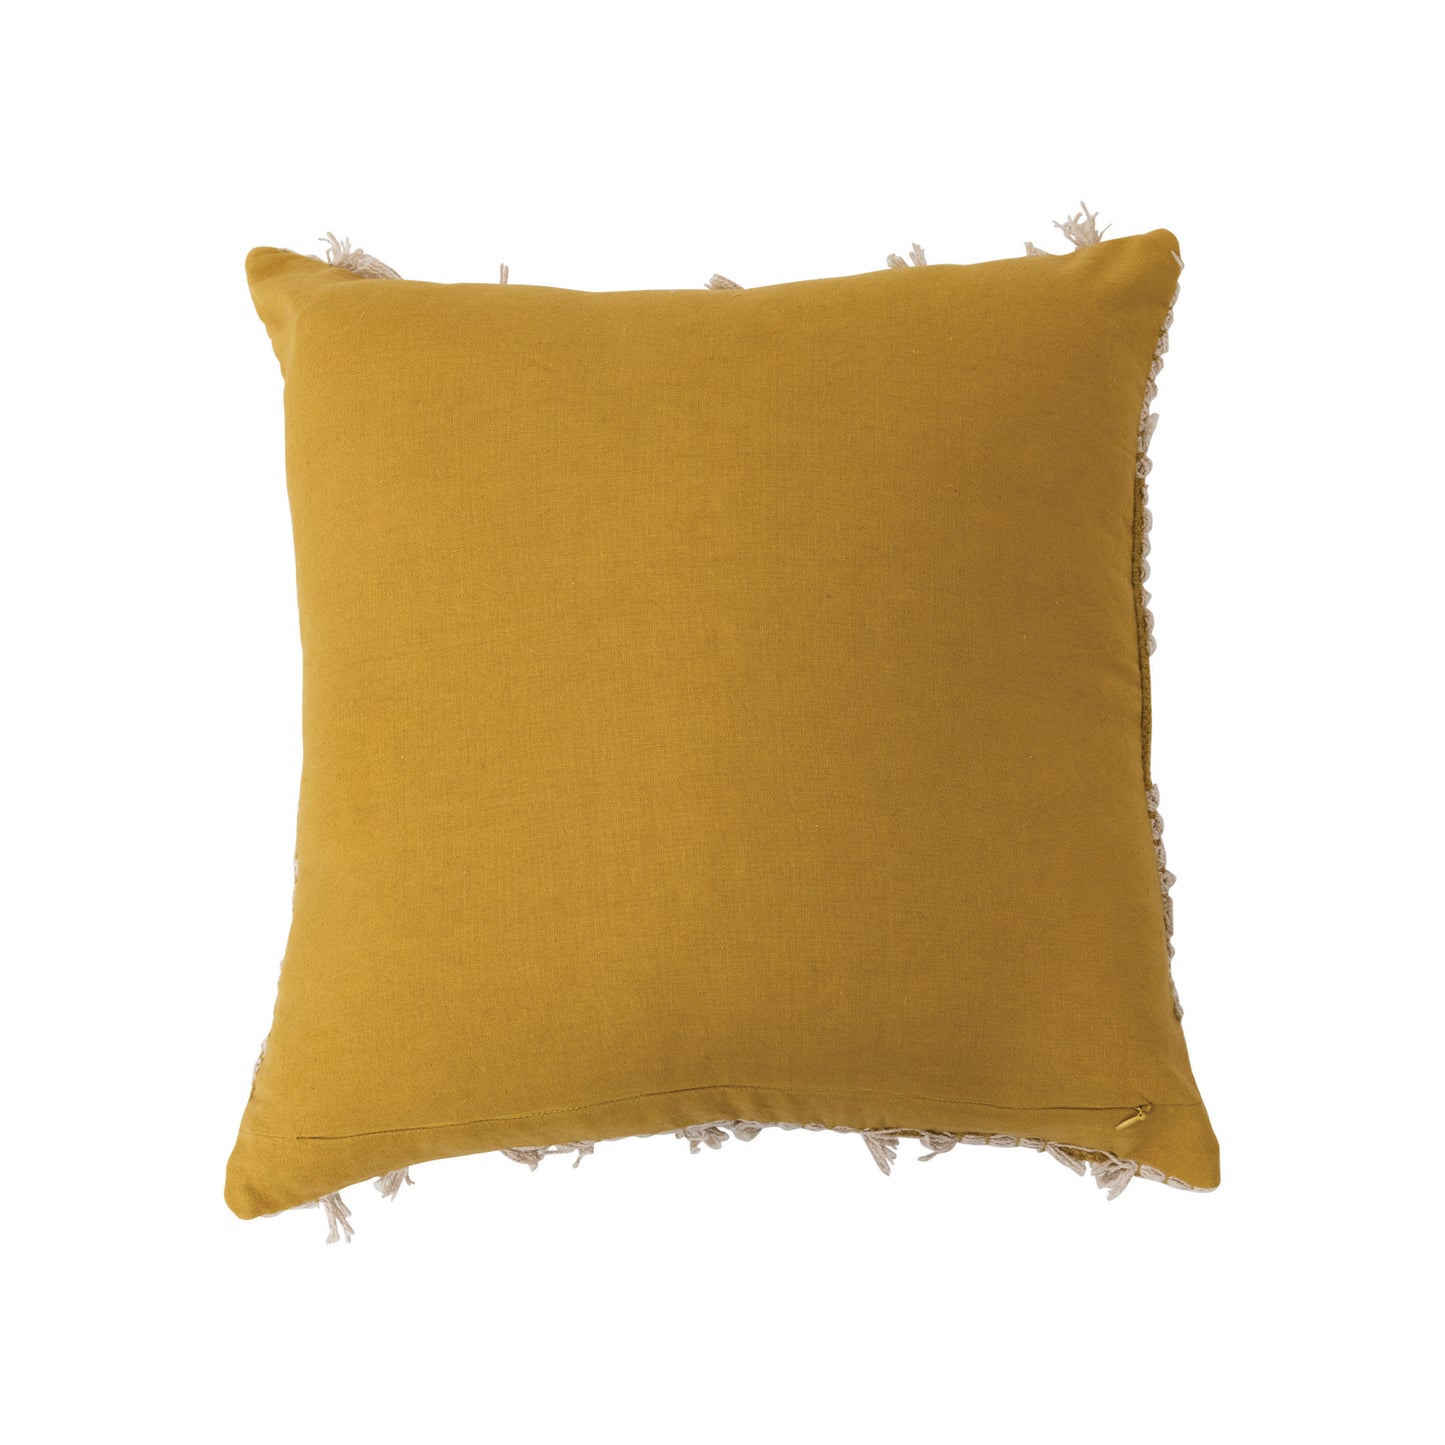 18" Woven Cotton Dhurrie Pillow with Fringe